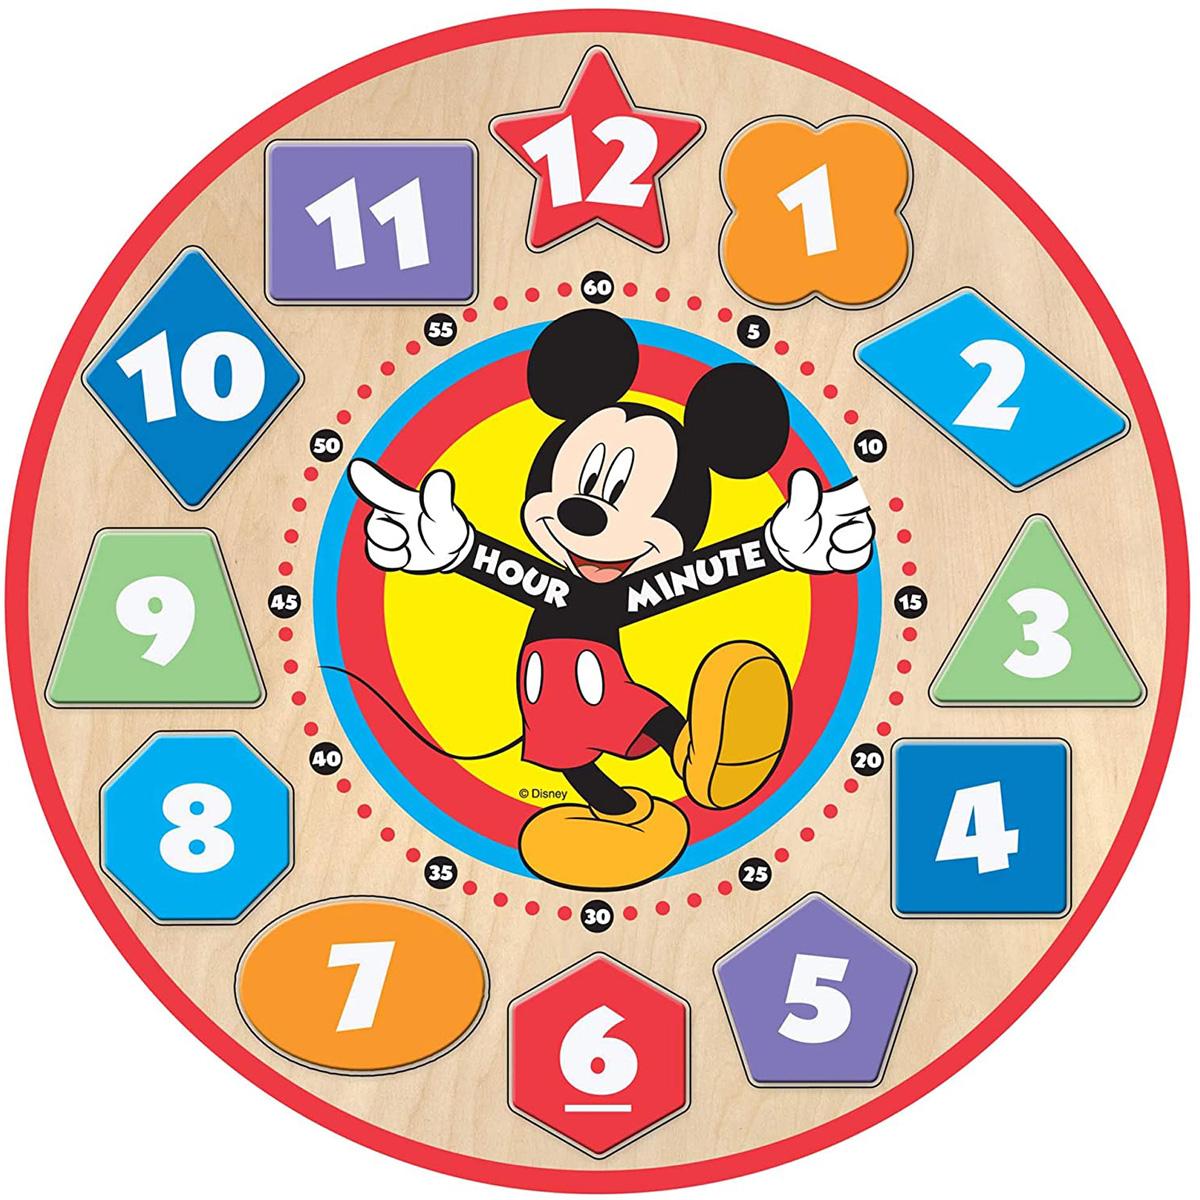 Melissa and Doug Disney Mickey Mouse Wooden Shape Clock for $6.97